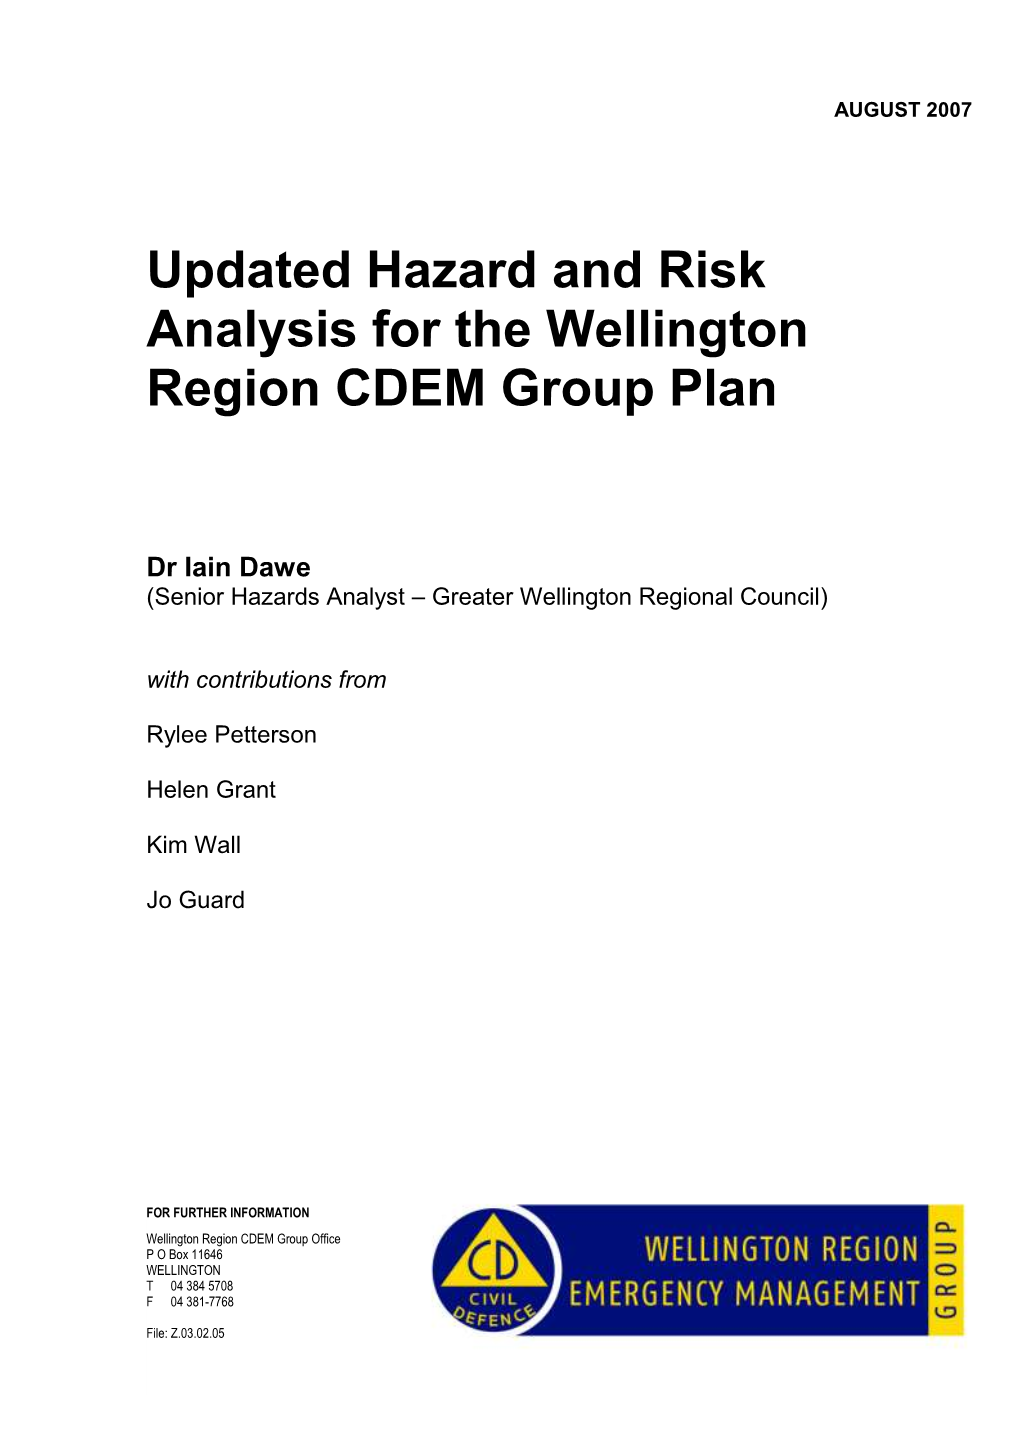 Updated Hazard and Risk Analysis for the Wellington Region CDEM Group Plan